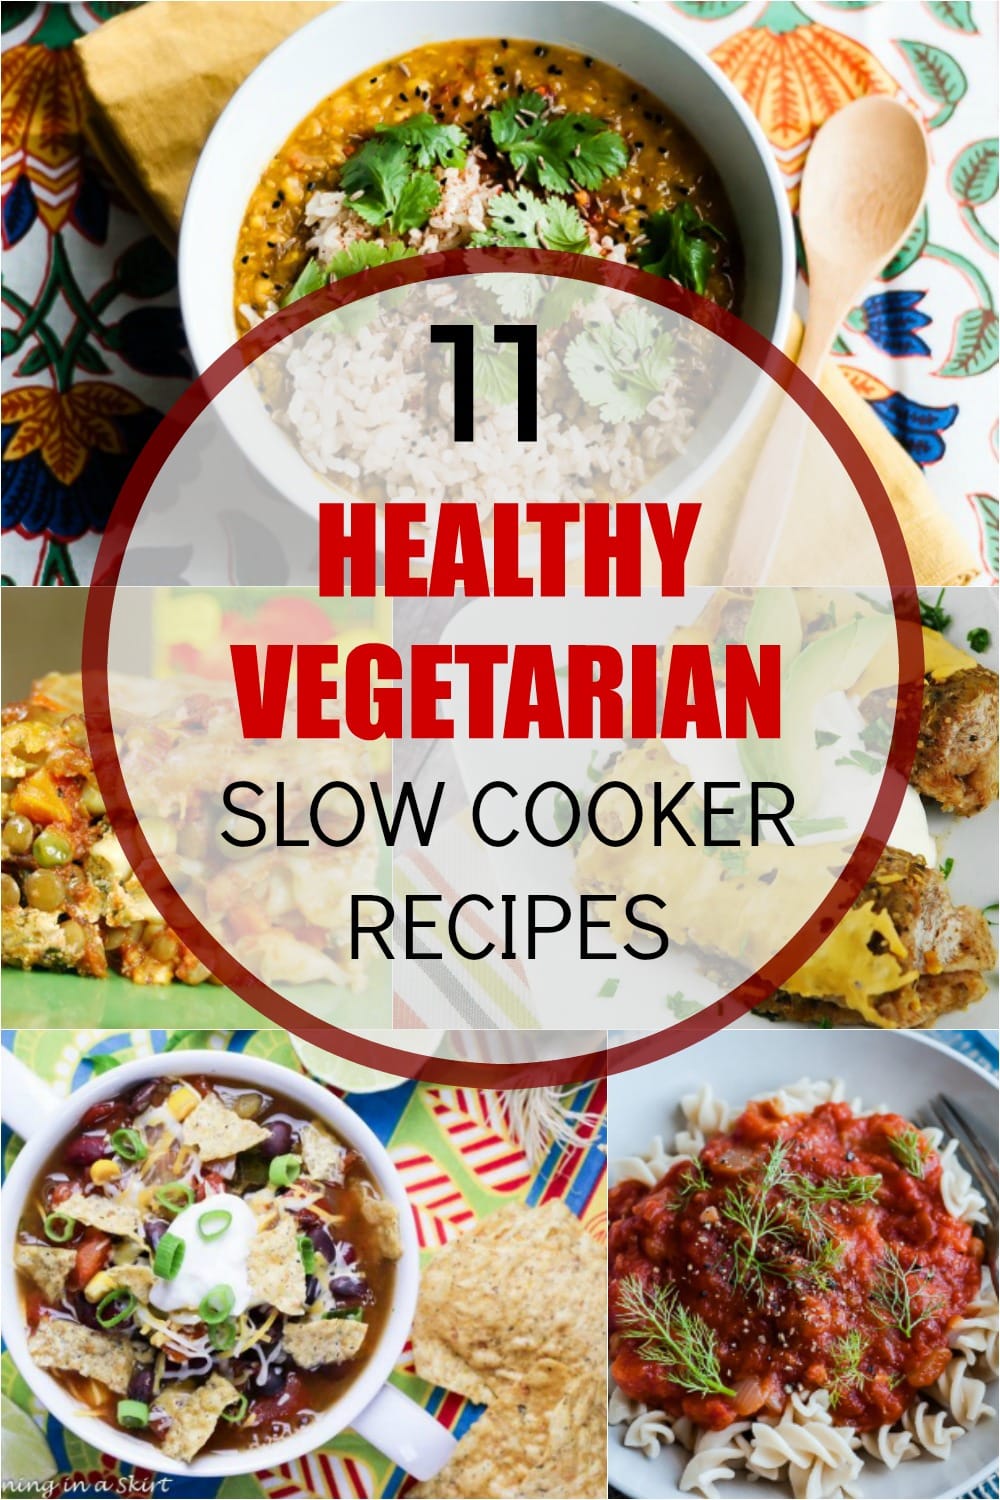 I love my slow cooker but I have had trouble finding vegetarian crock pot recipes. These are some awesome ideas!!